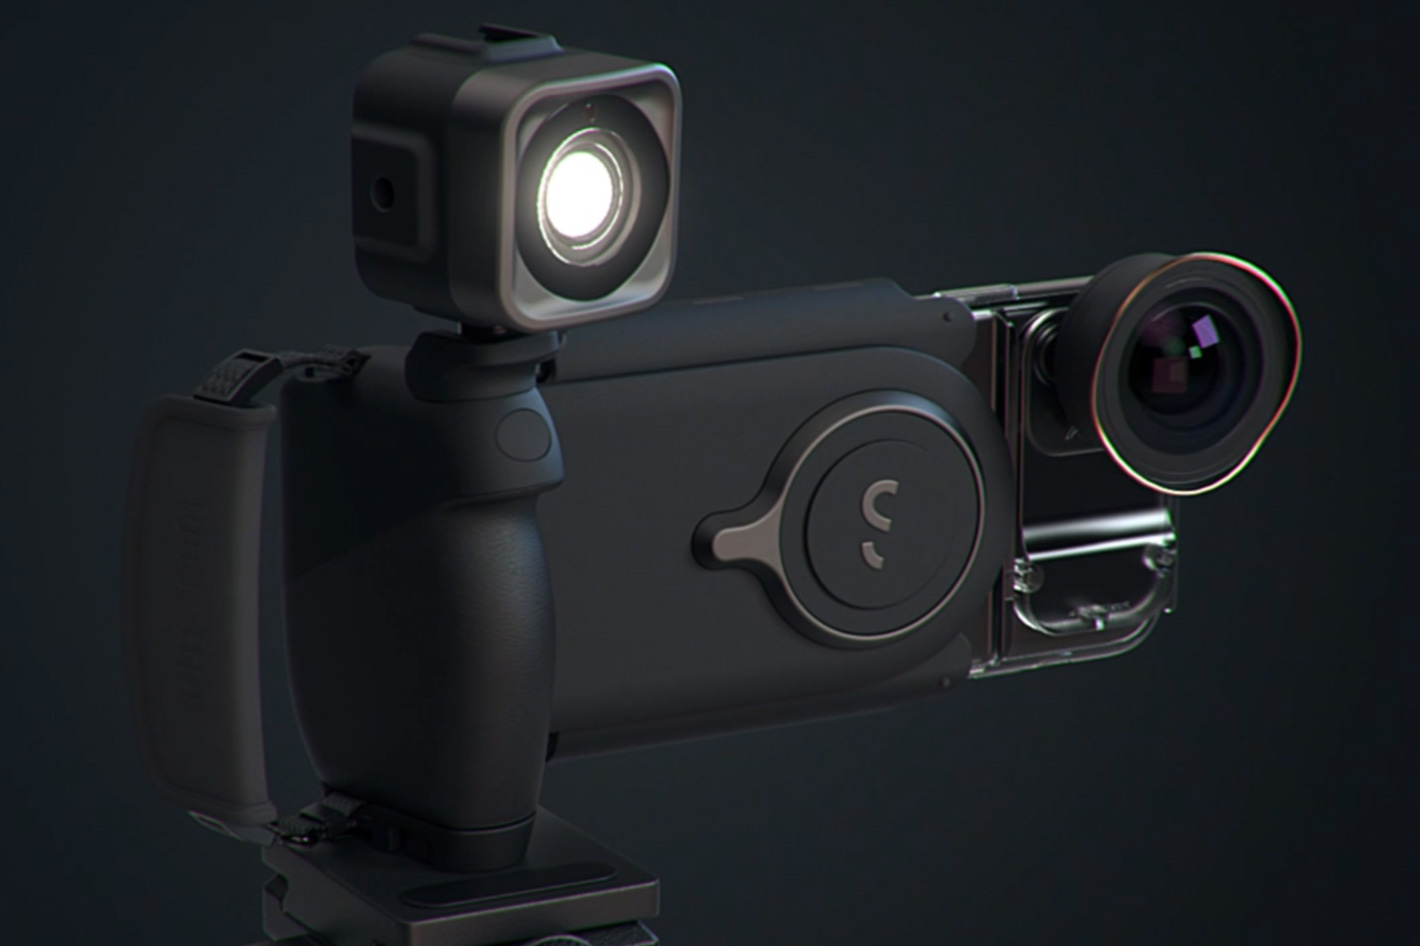 Need stability? Get a ShiftCam ProGrip for your smartphone by Jose Antunes  - ProVideo Coalition